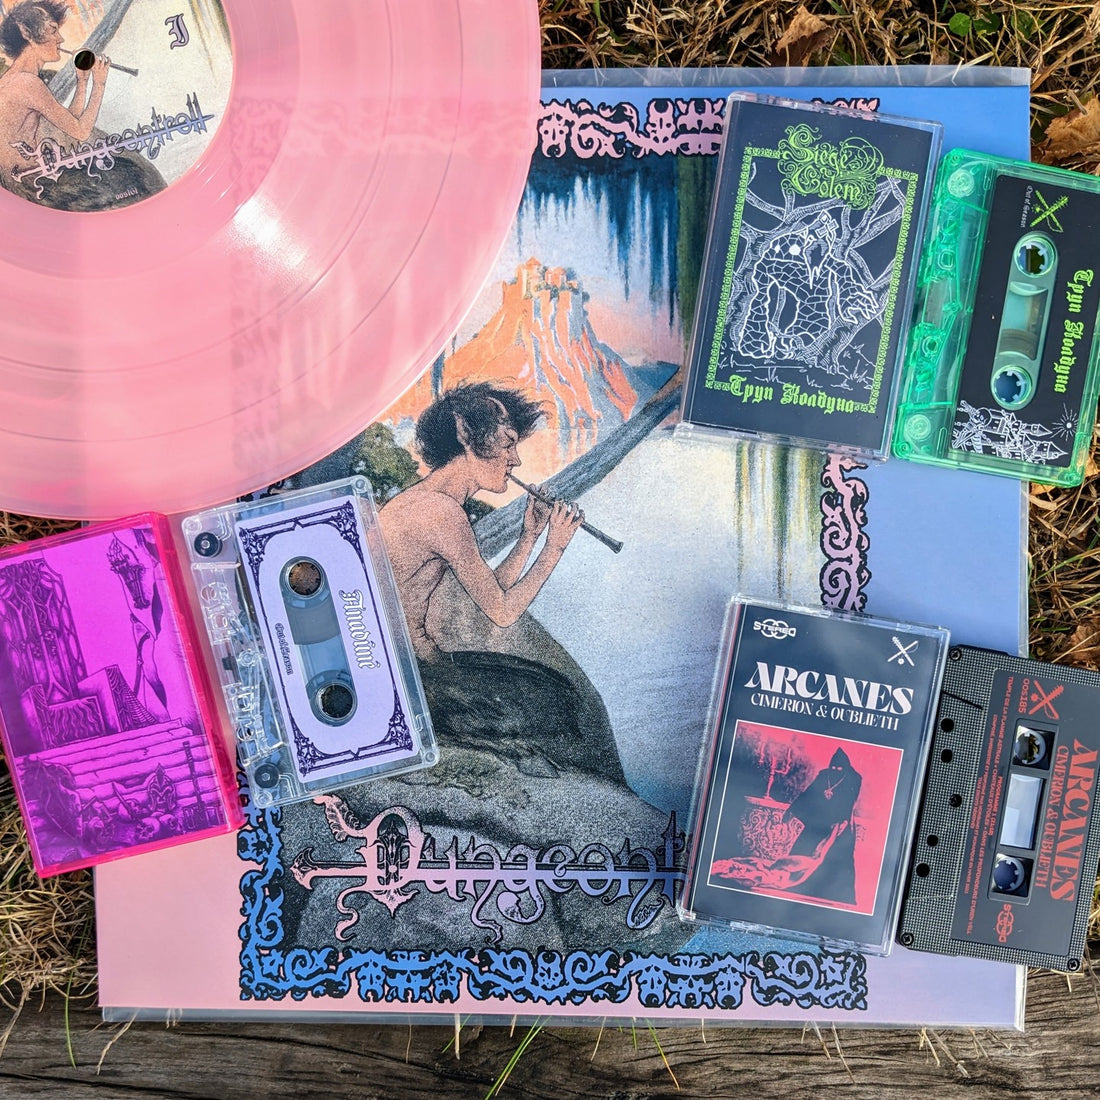 OUT NOW! Dungeontroll pink vinyl LP, plus 3 new cassette releases